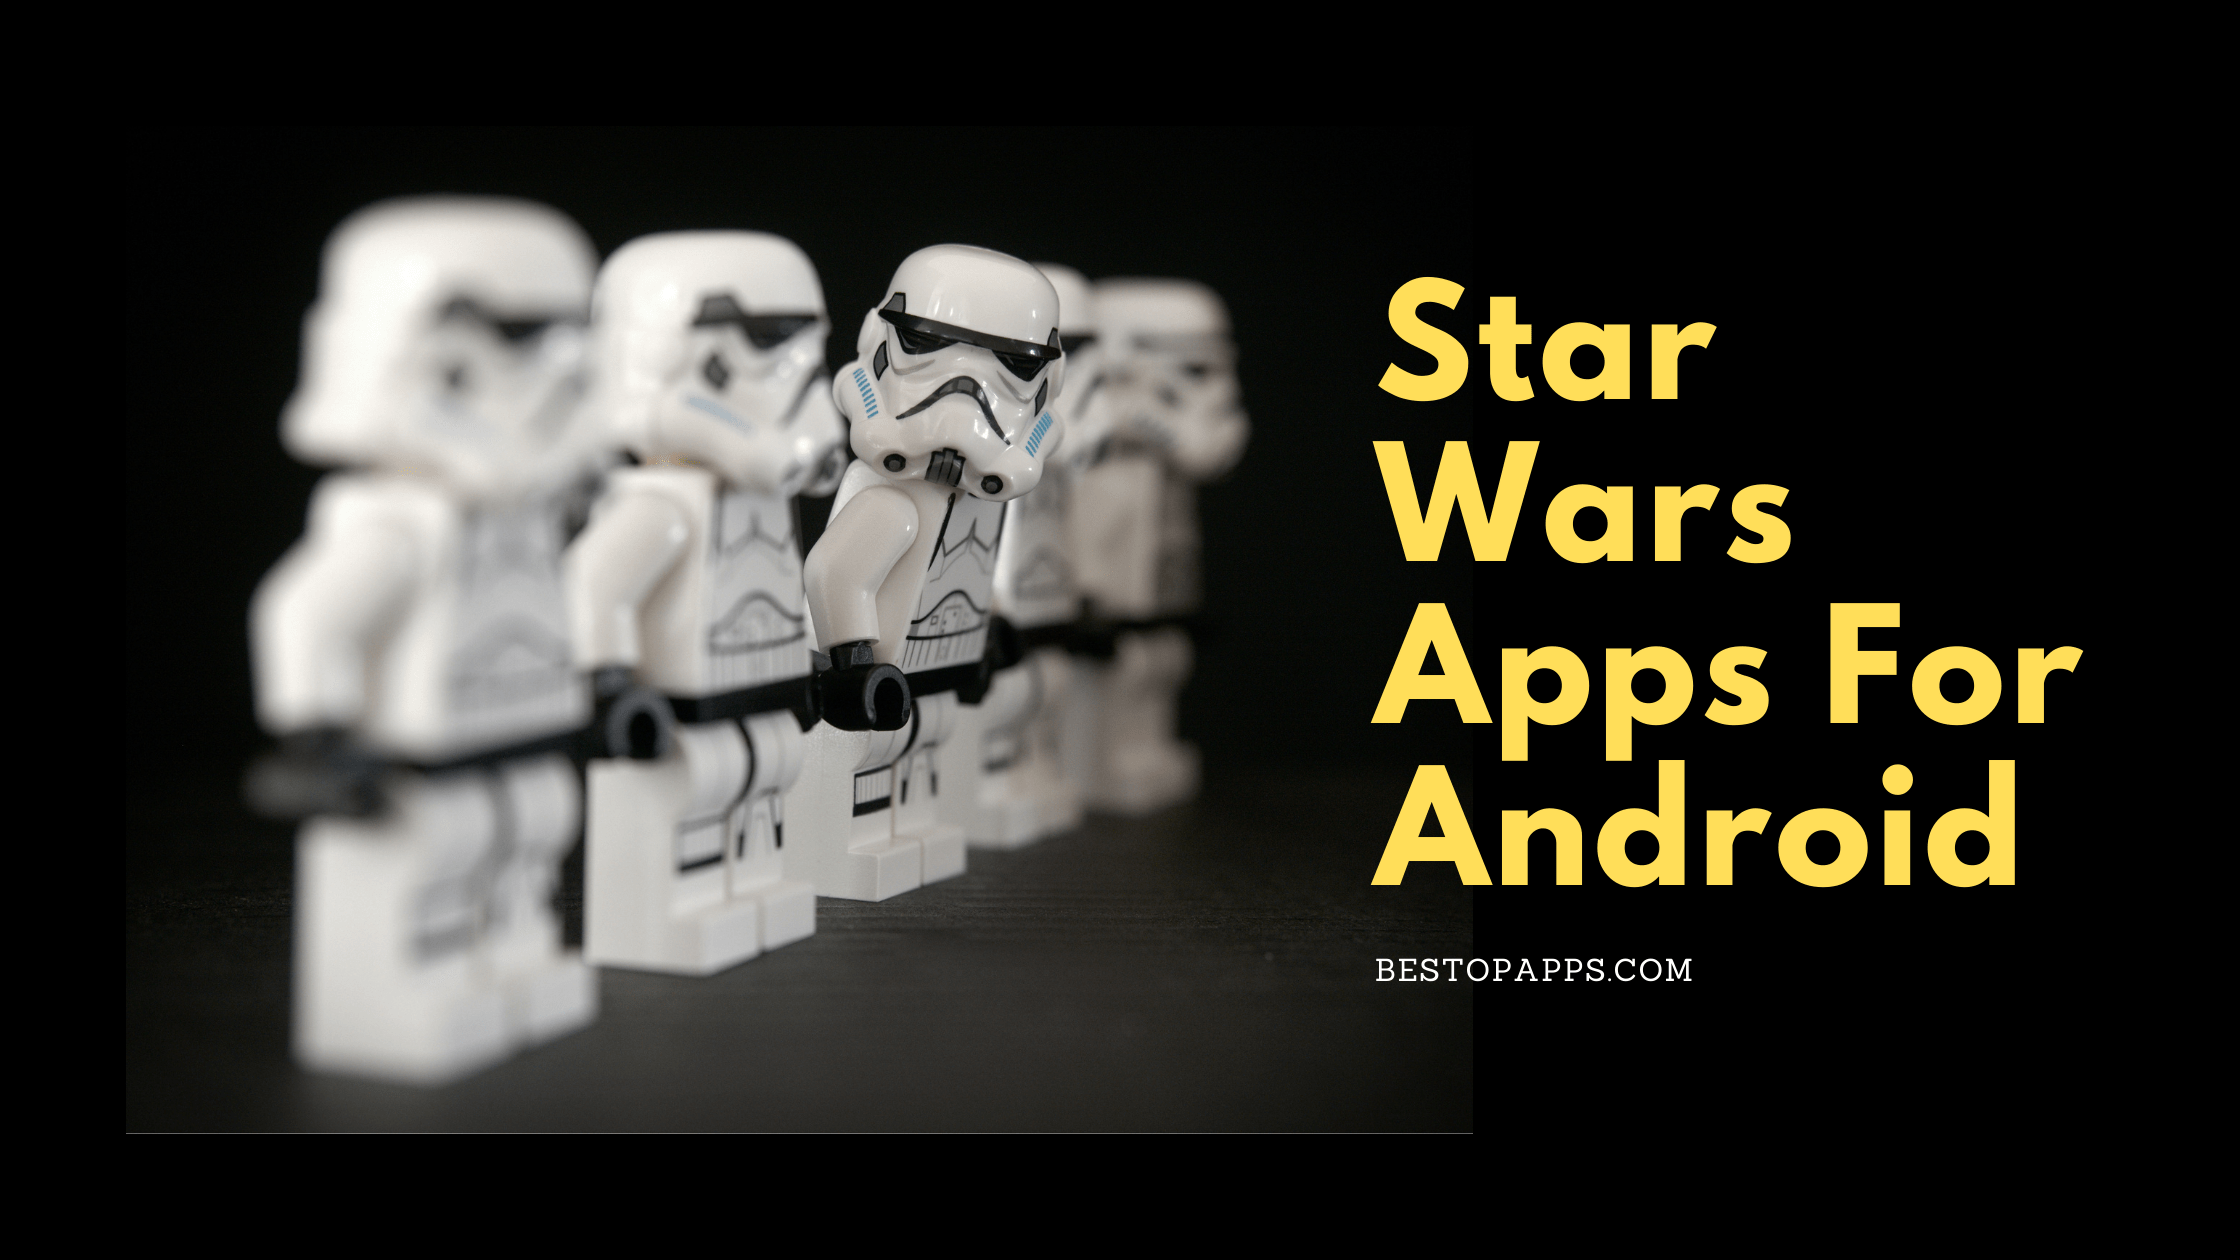 Star Wars Apps For Android